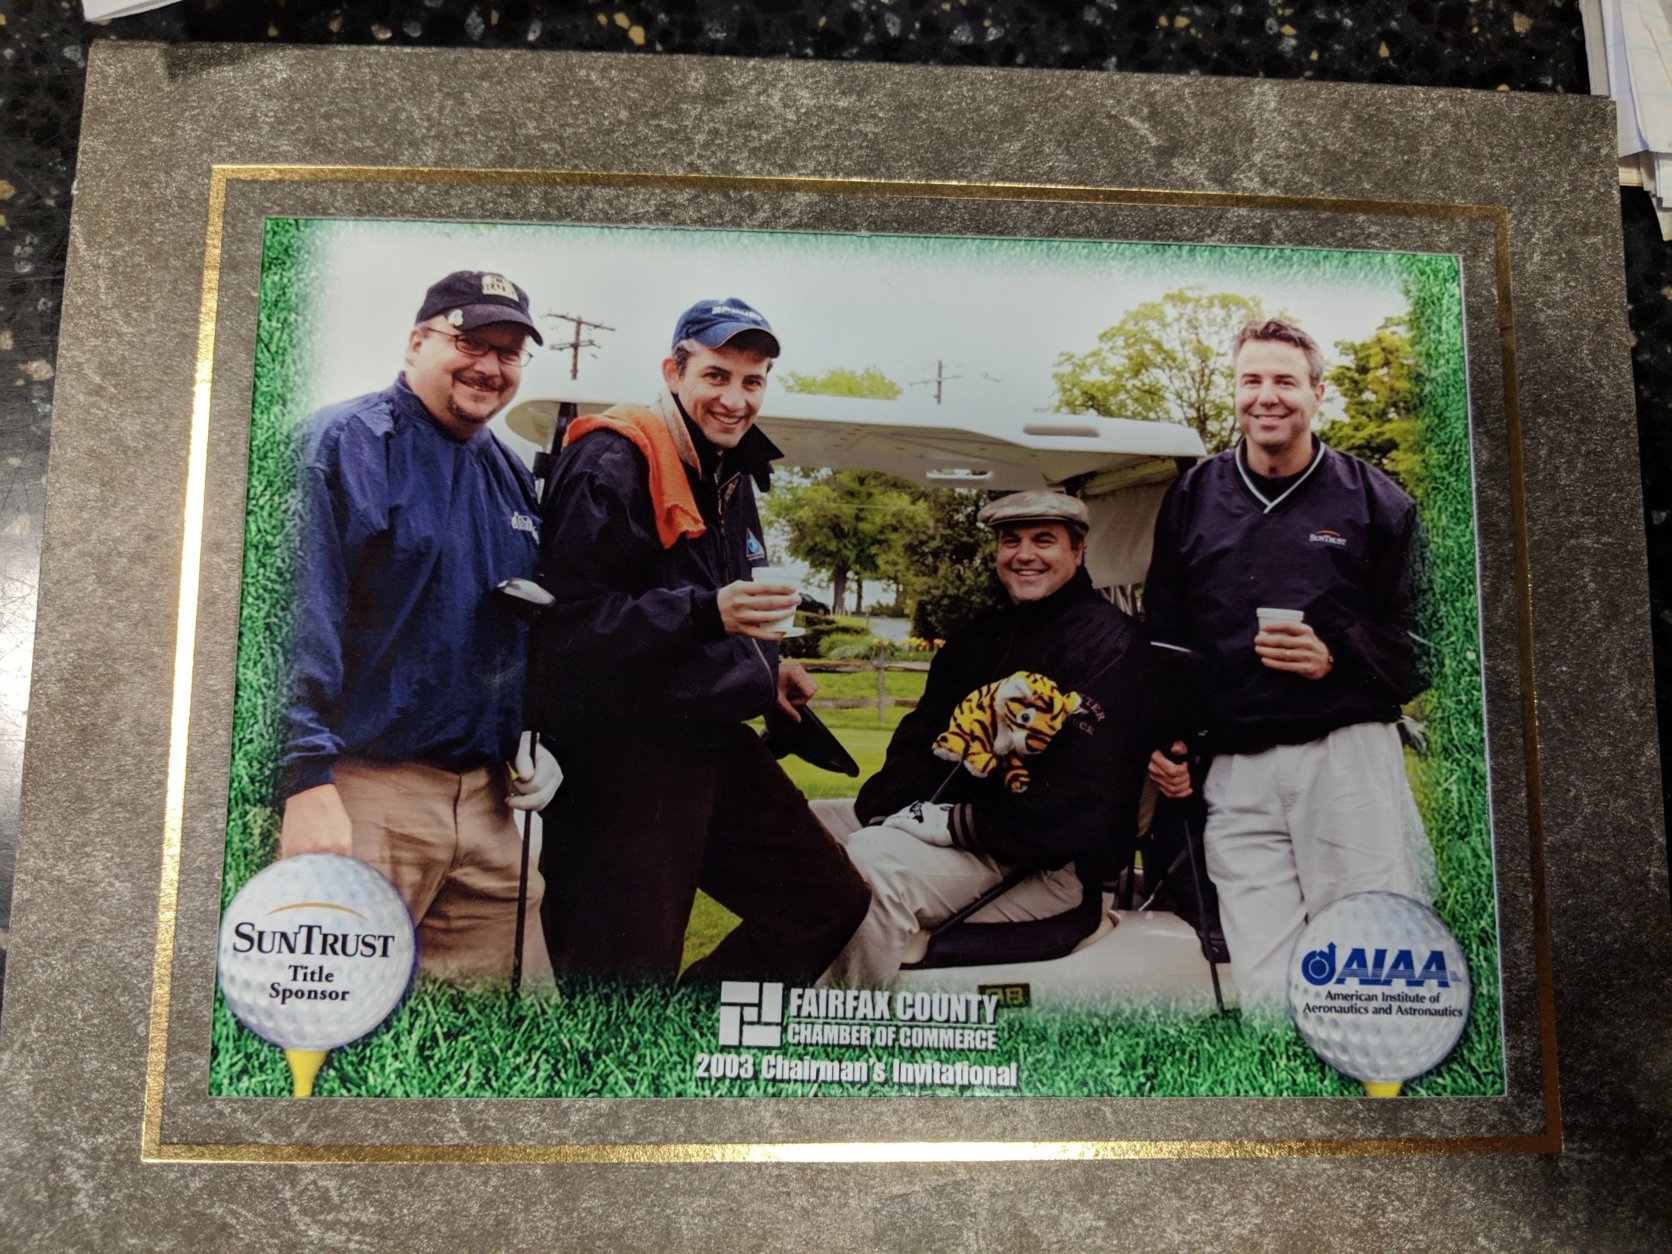 This is a snapshot from the 2003 Fairfax County Chamber of Commerce Chairman's Invitational. As everyone knows, it's where WTOP News Director Mike McMearty (far left) and General Manager Joel Oxley (far right) shot a 51 and 50, respectively. Both later turned down invitations to join the PGA Tour. Also pictured here are two guys who are not my bosses and are, therefore, probably average golf players. (WTOP/Jack Pointer)